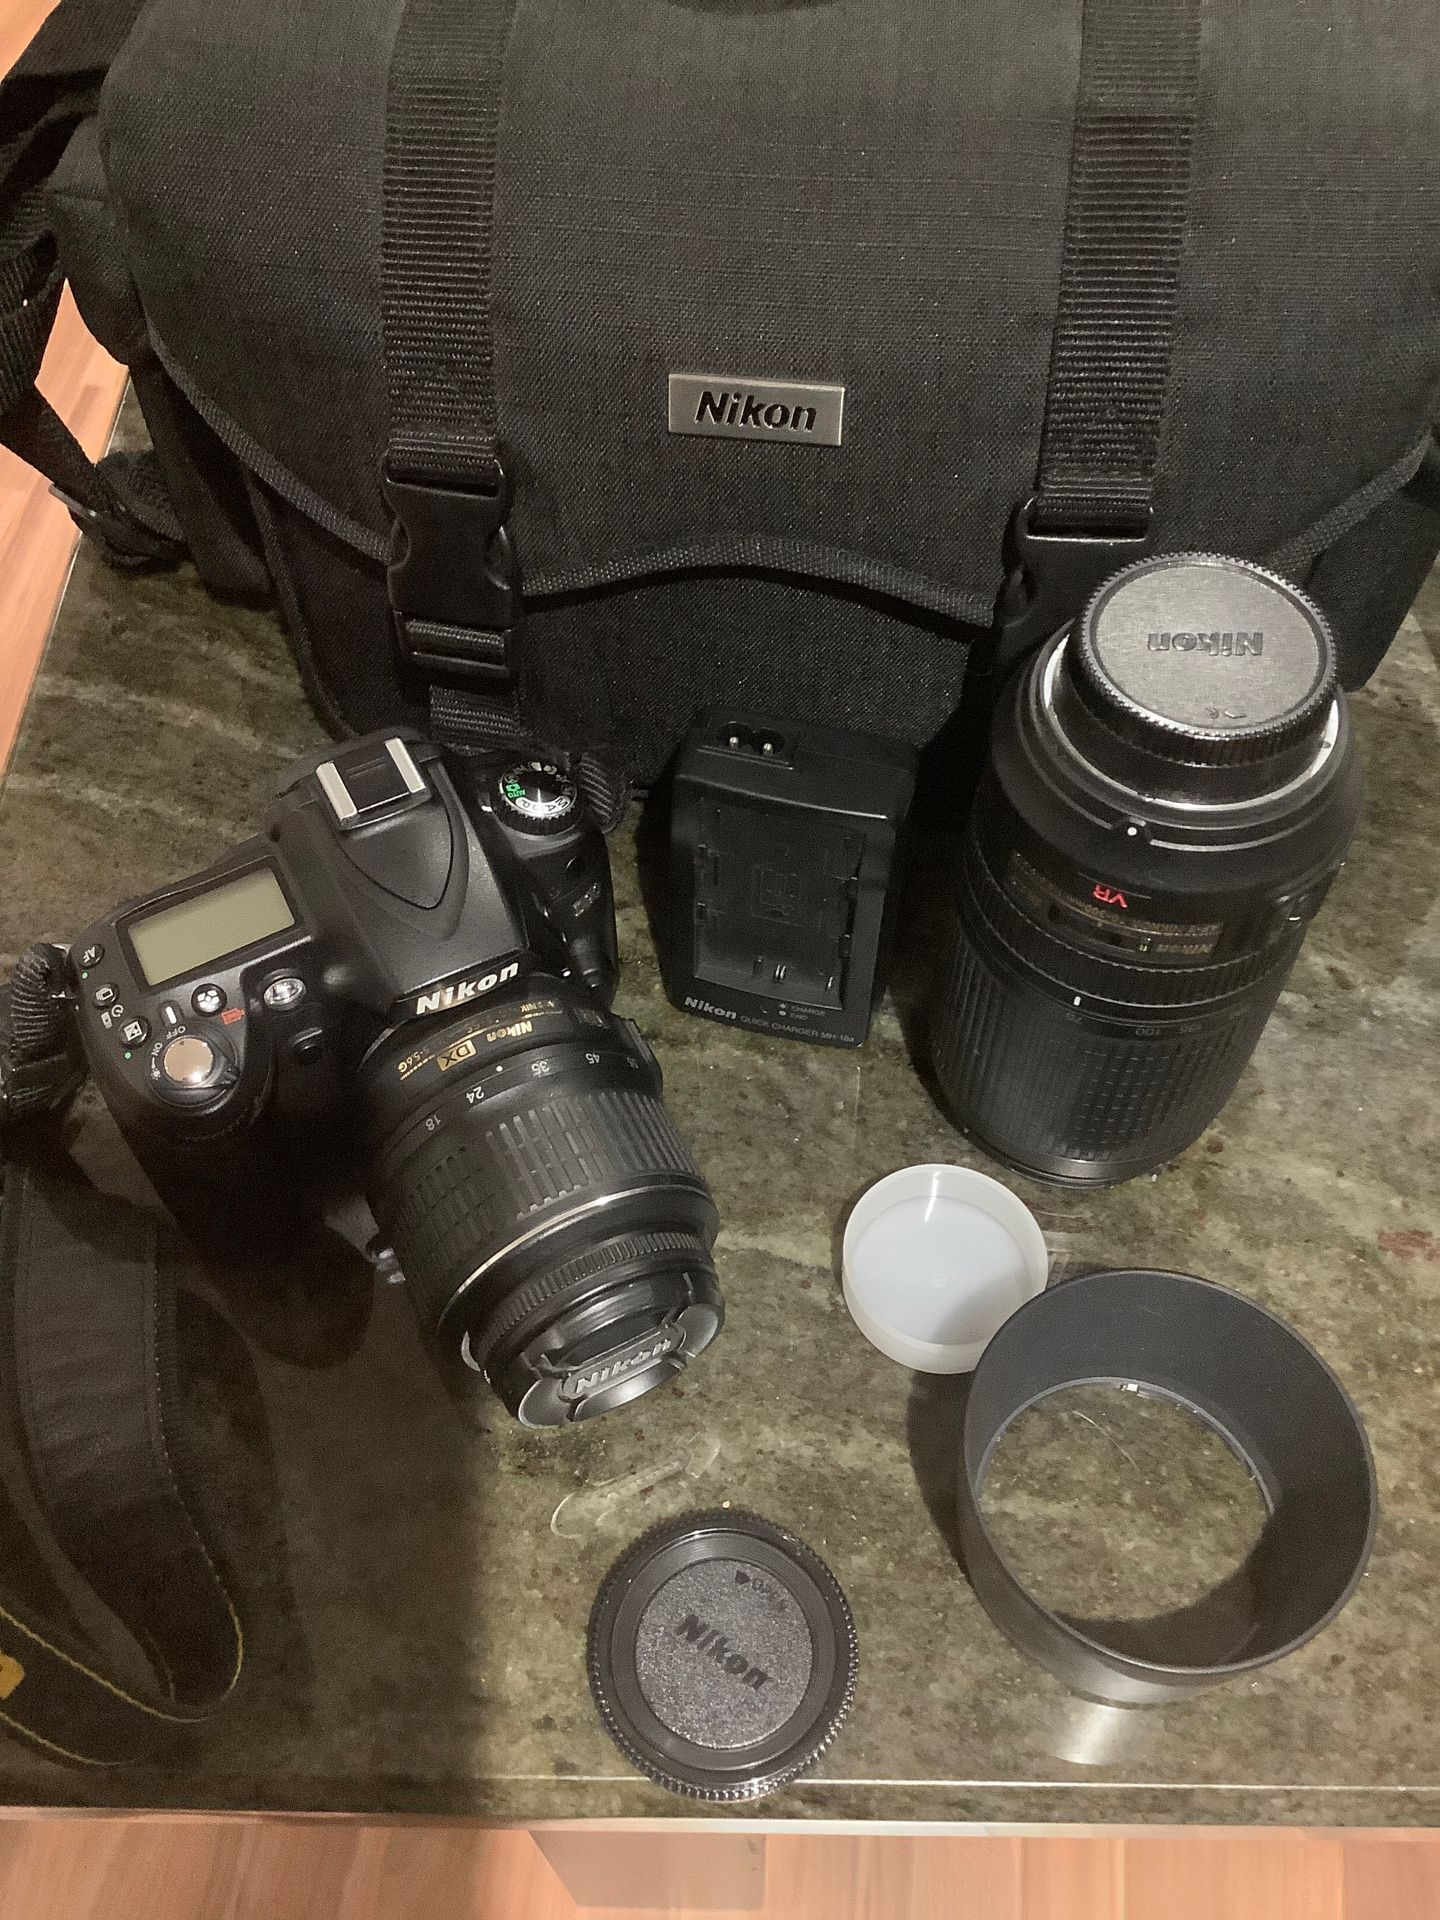 Nikon D90 kit with 18-55mm and 70-300mm lenses